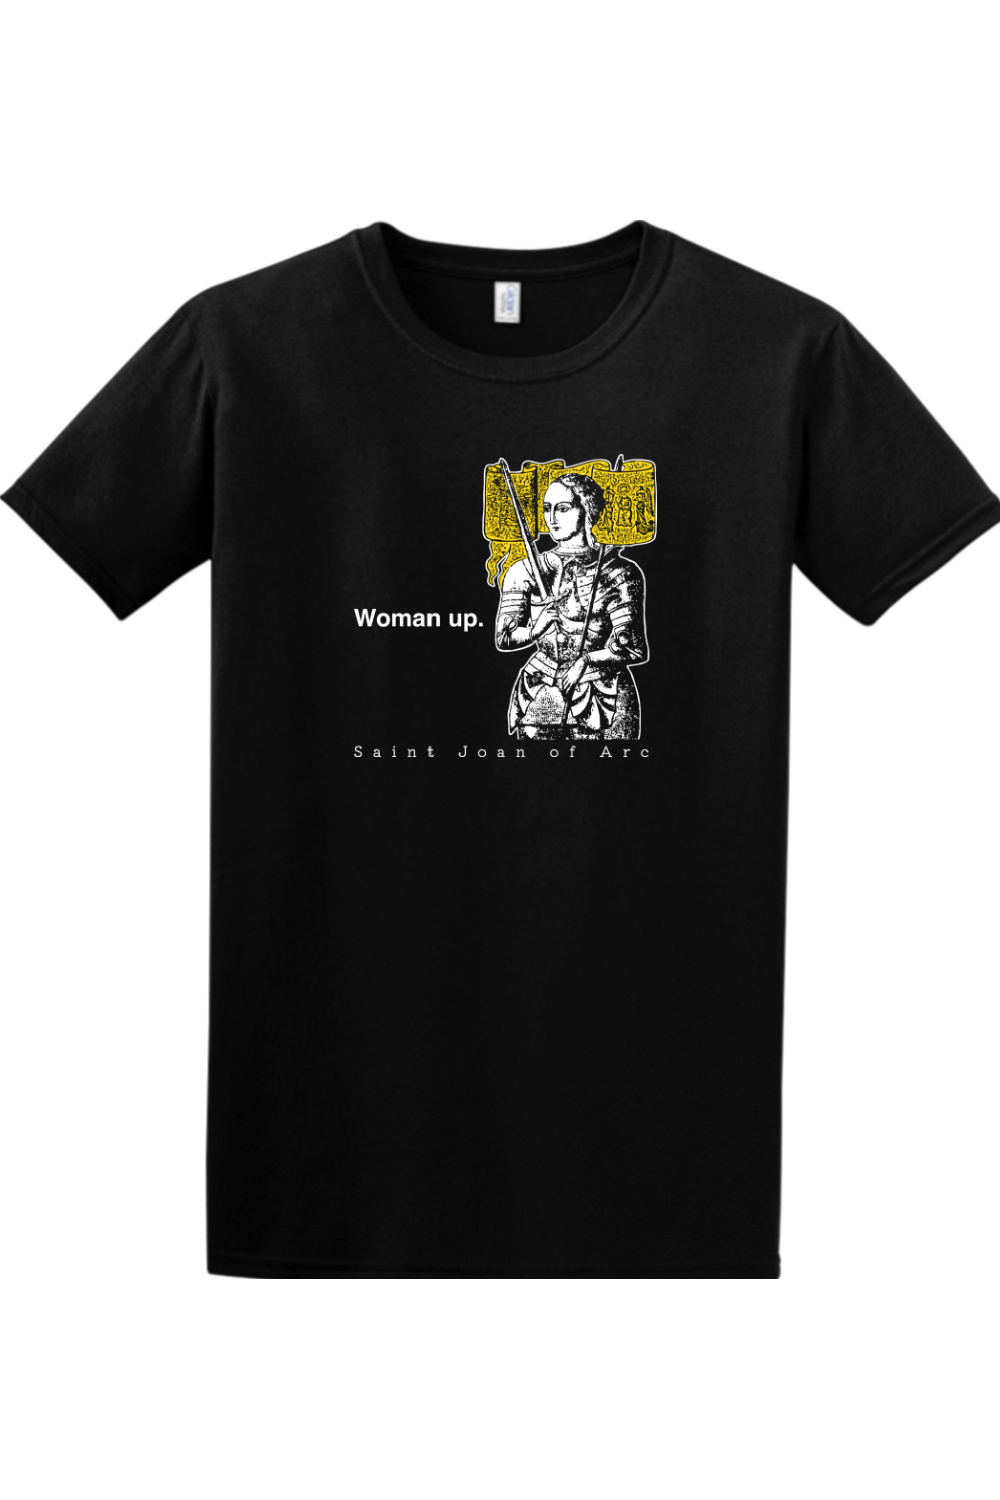 Woman Up - St. Joan of Arc Adult T-Shirt